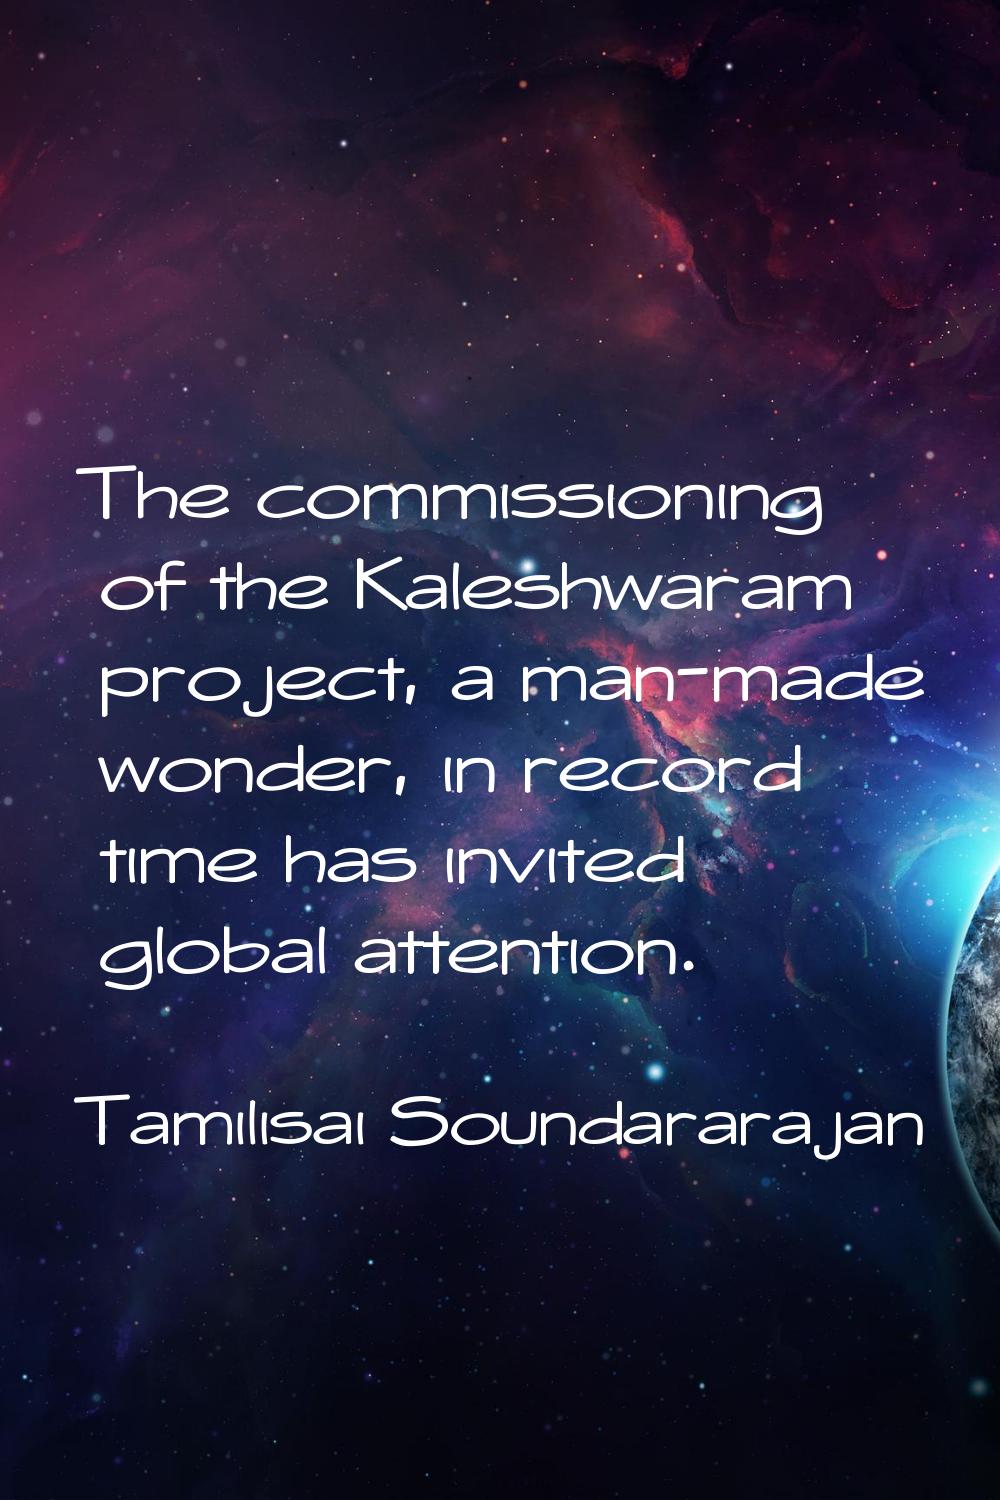 The commissioning of the Kaleshwaram project, a man-made wonder, in record time has invited global 